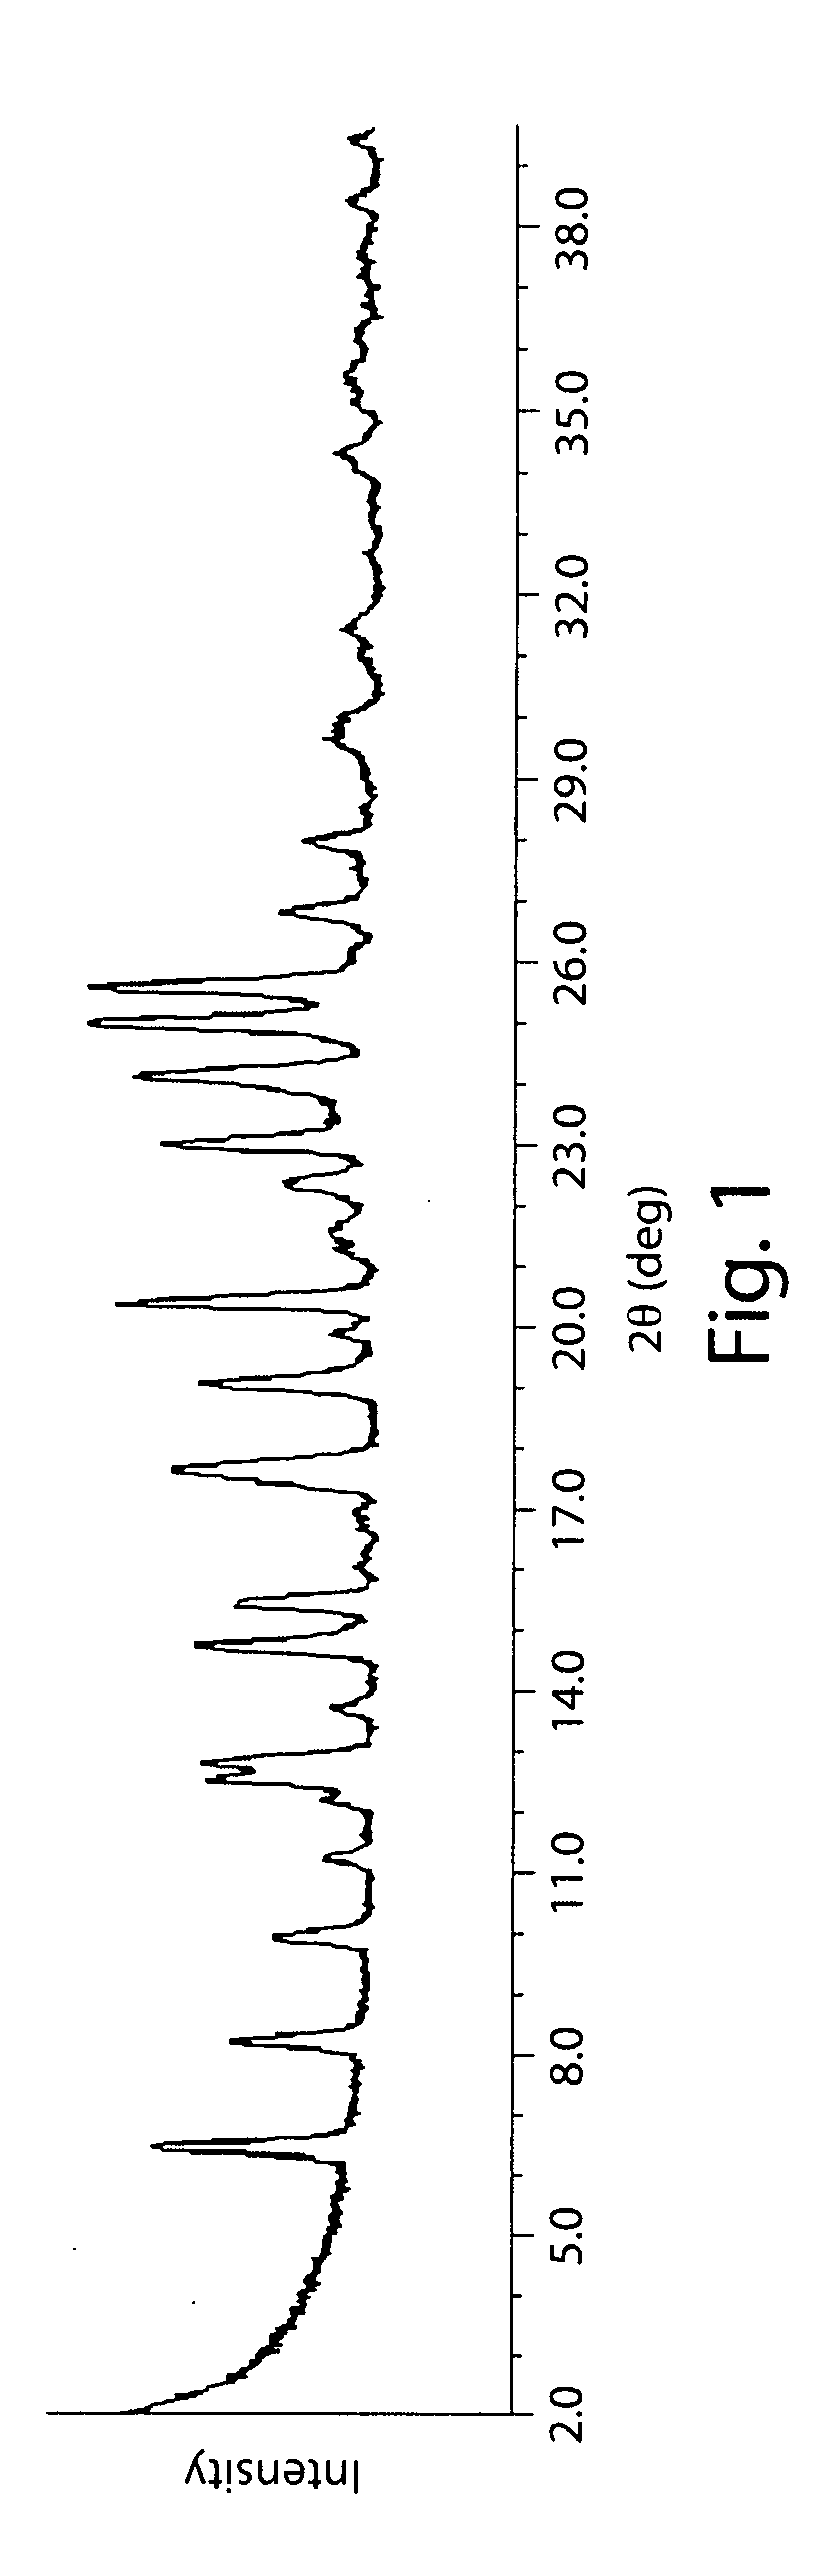 Method for reducing the risk of or preventing infection due to surgical or invasive medical procedures